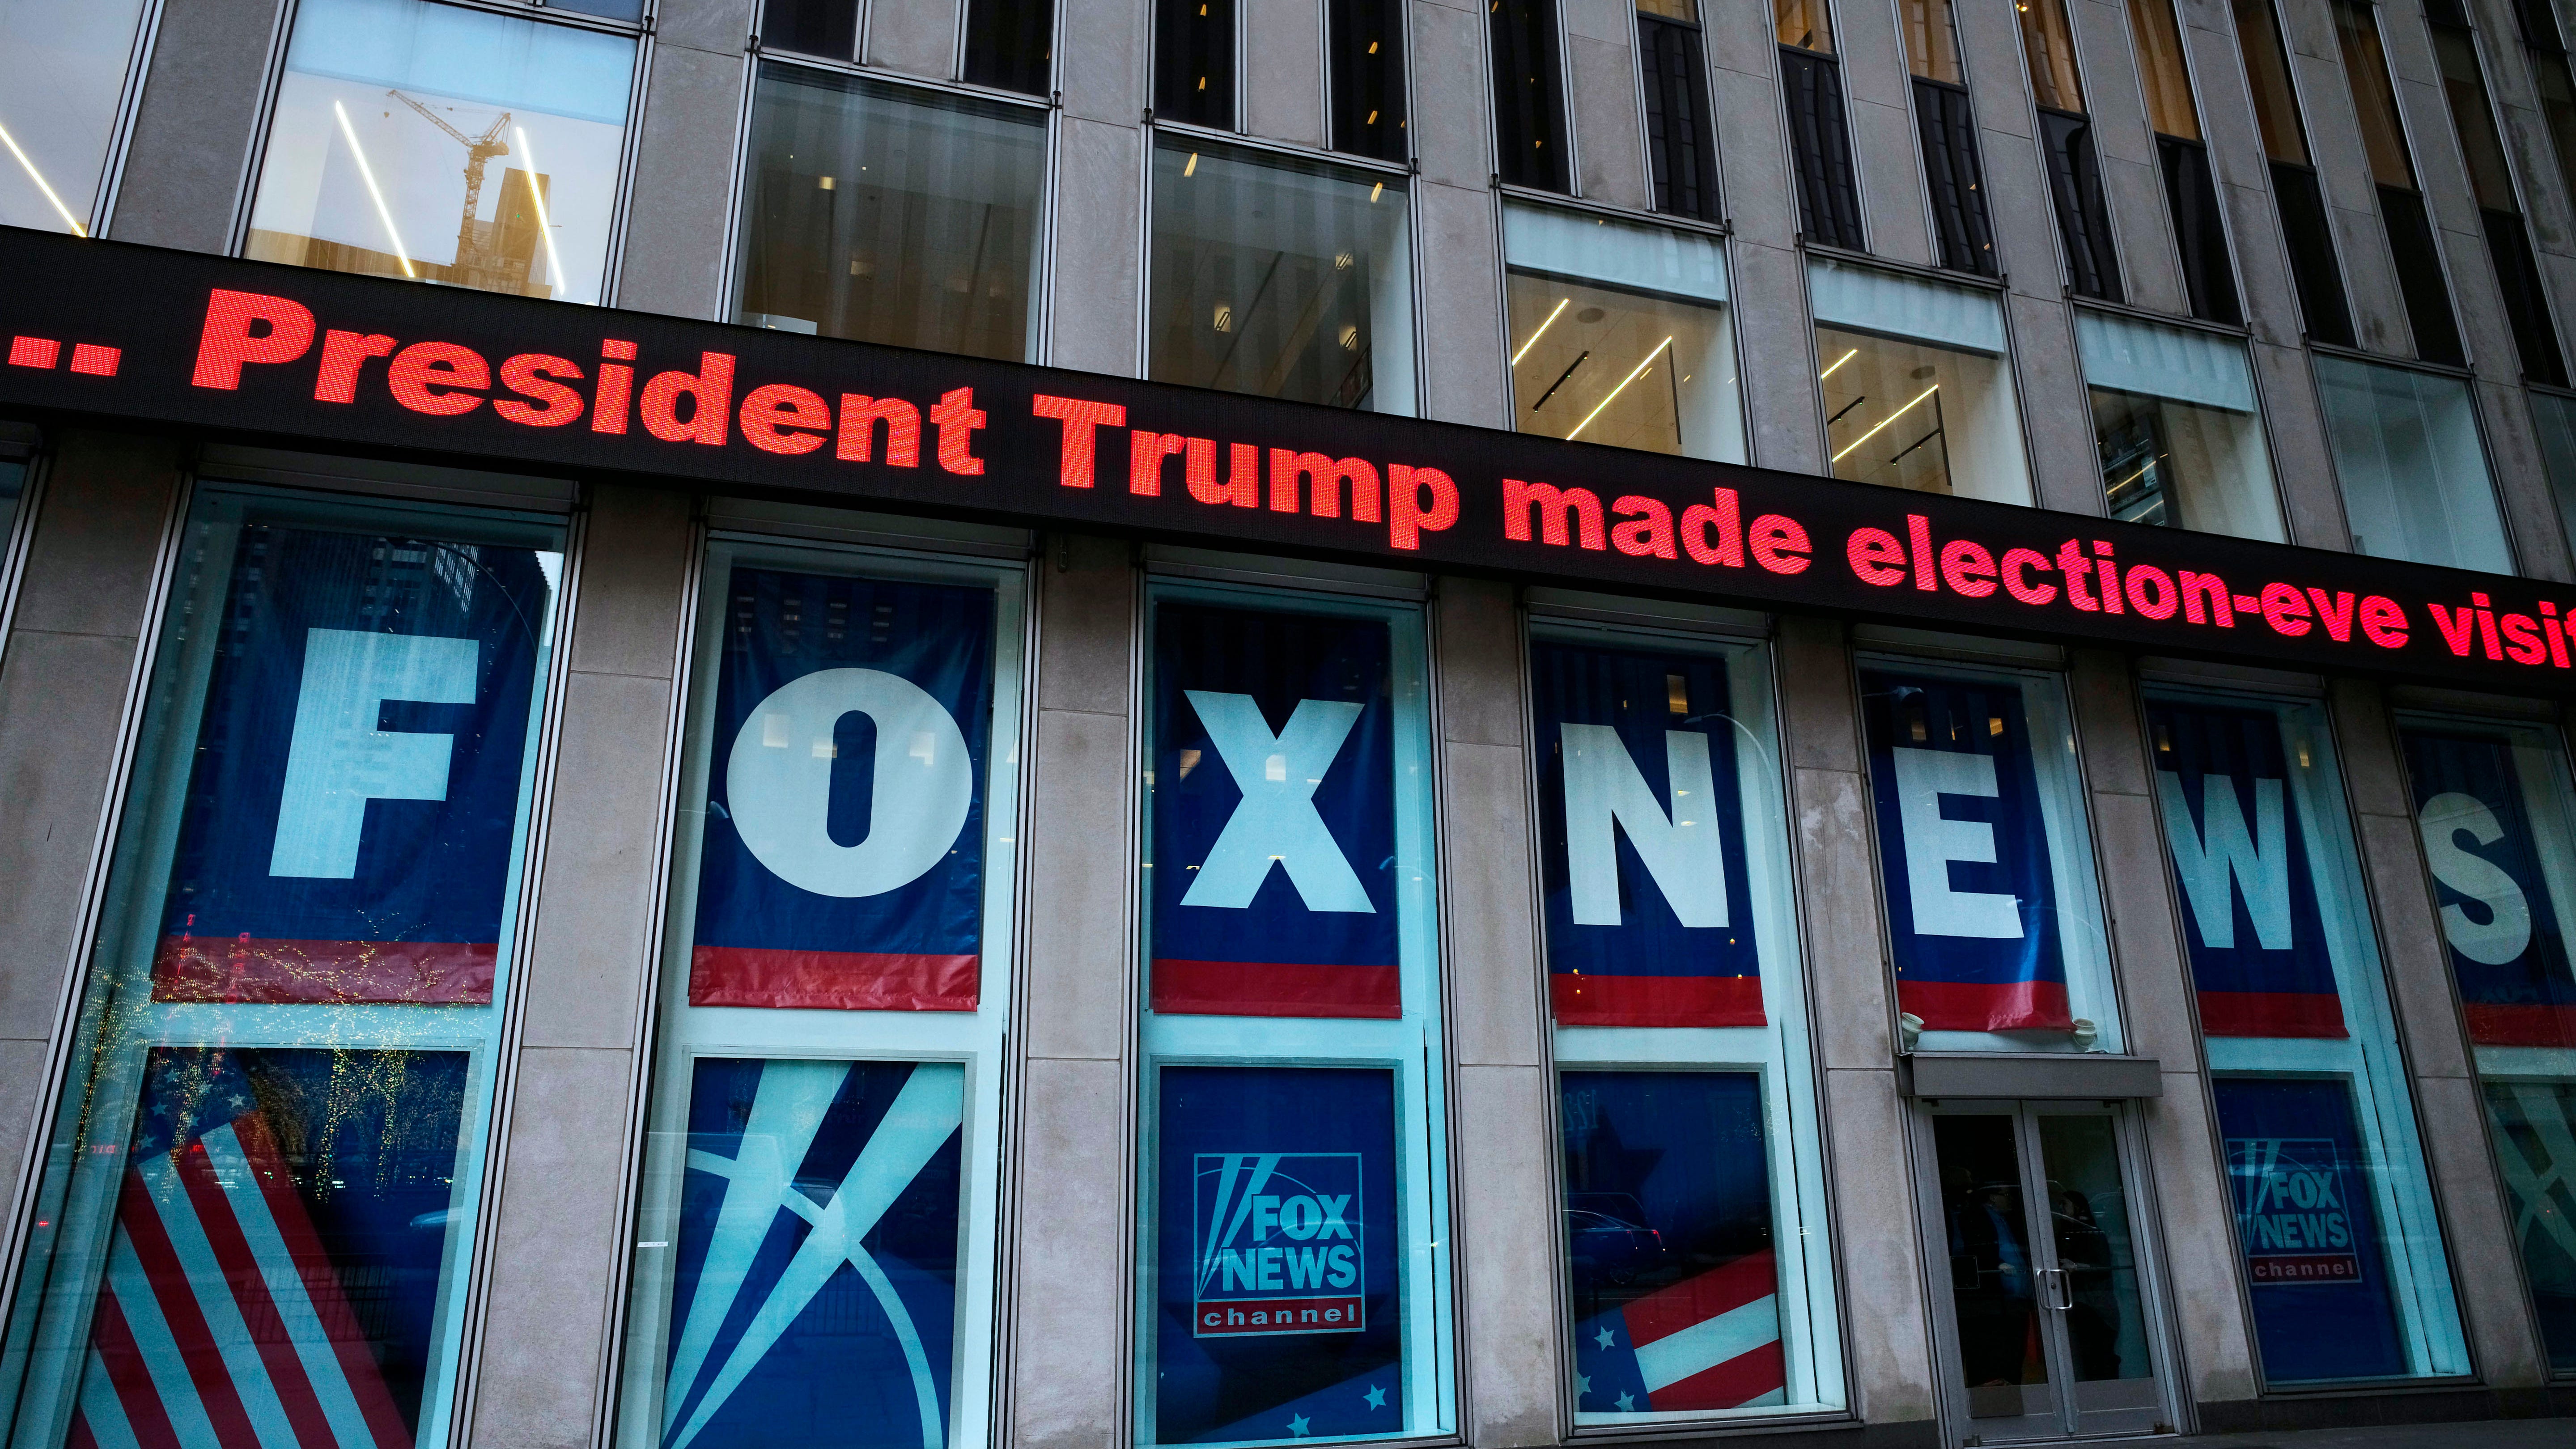 FILE - A headline about President Donald Trump is displayed outside Fox News studios in New York on Nov. 28, 2018. Documents in defamation lawsuit illustrate pressures faced by Fox News journalists in the weeks after the 2020 presidential election. The network was on a collision course between giving its conservative audience what it wanted and reporting uncomfortable truths about then-President Donald Trump and his false fraud claims. (AP Photo/Mark Lennihan, File) ORG XMIT: WX201